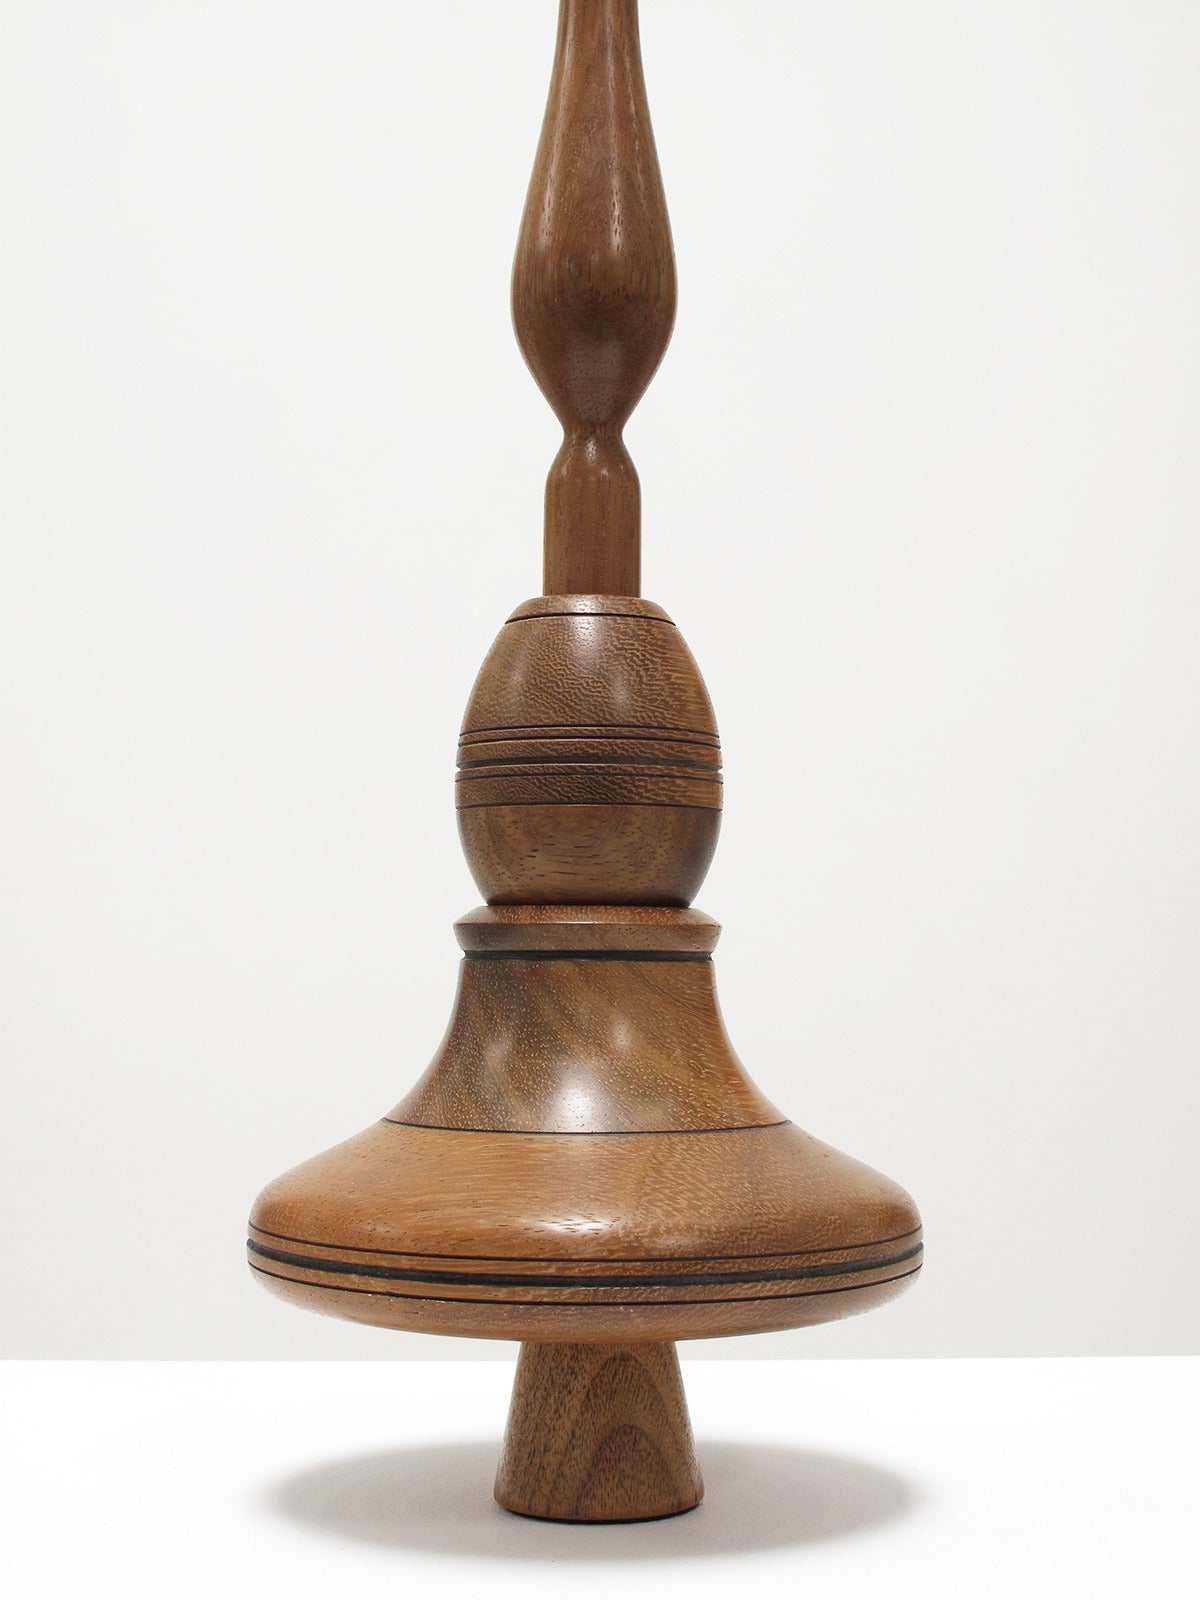 American Craftsman Solid Wood Spinning Top Sculpture by Richard Patterson For Sale